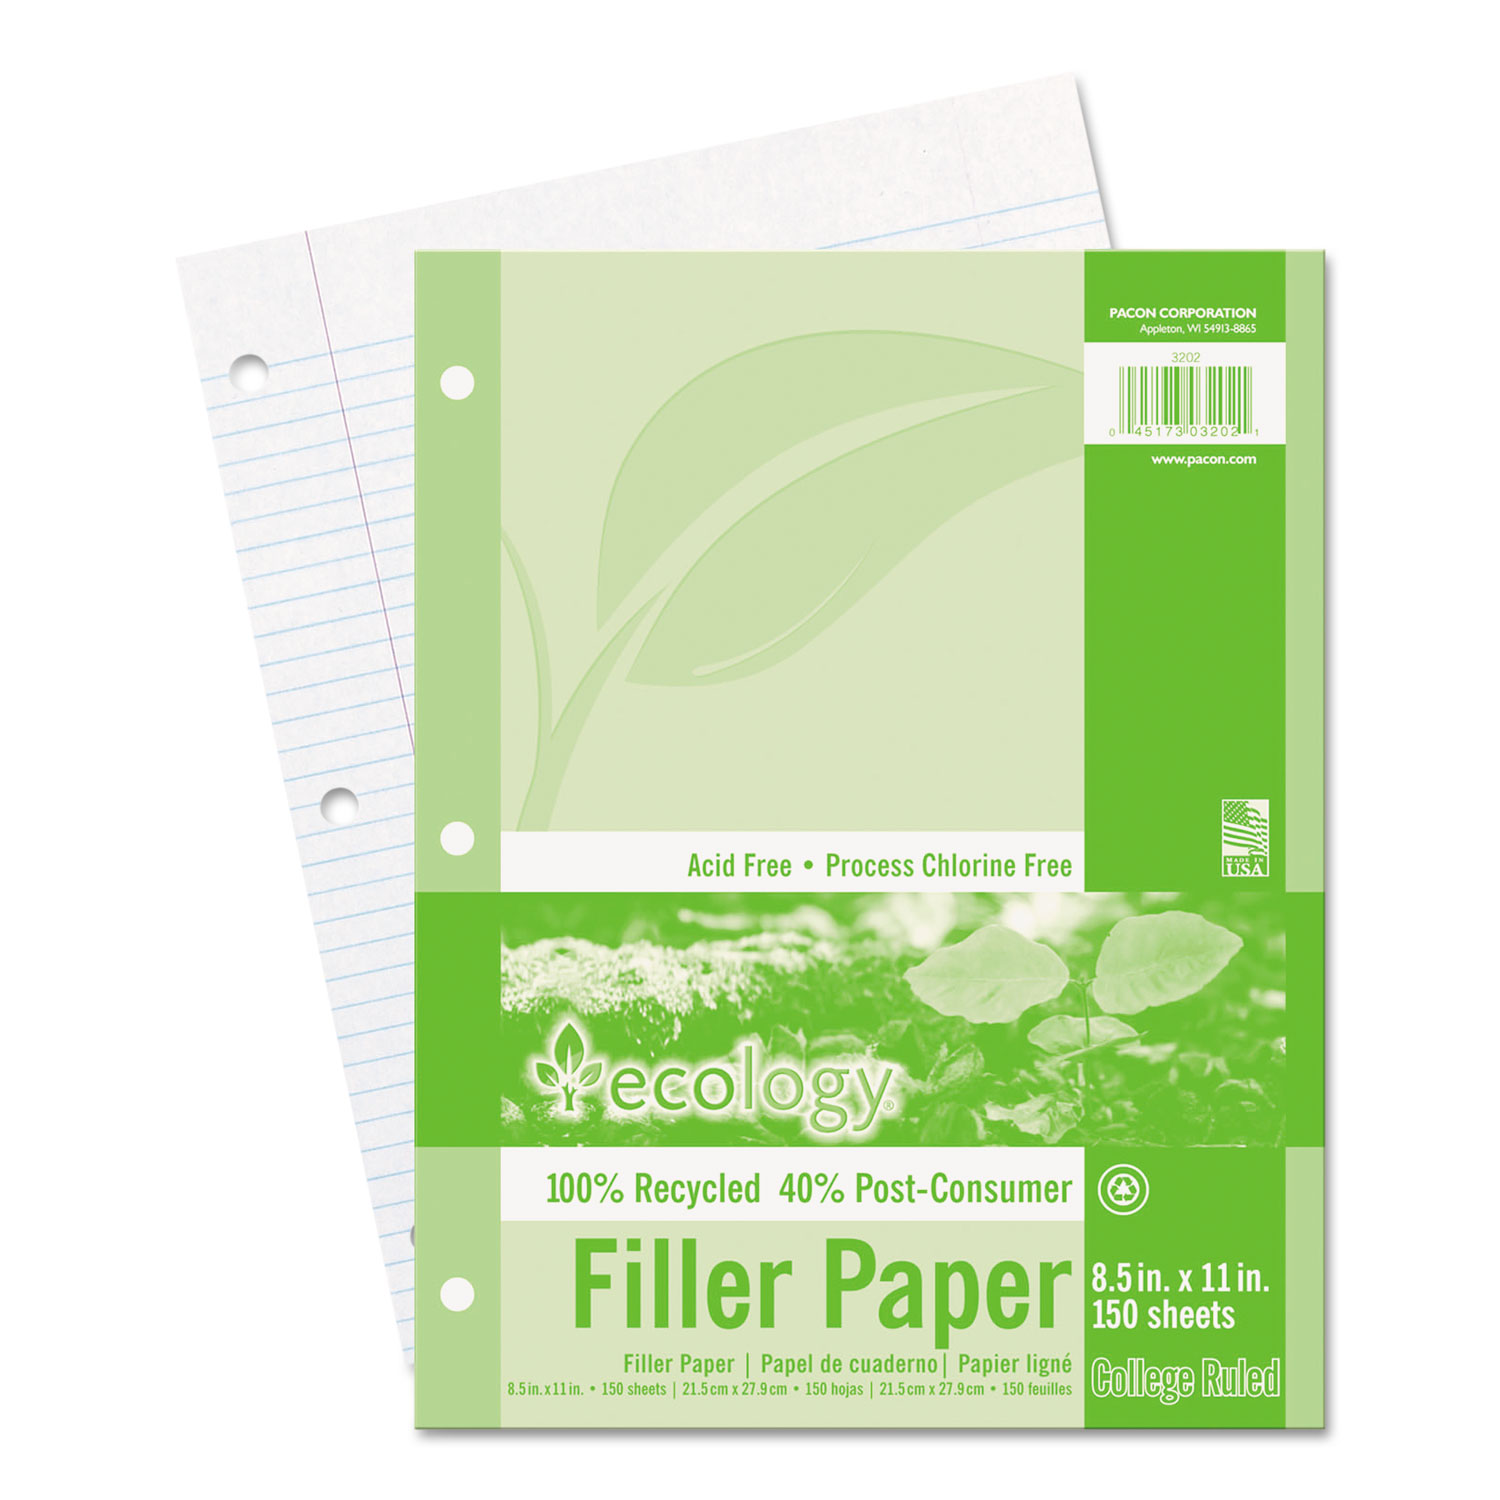 Ecology Filler Paper, 3-Hole, 8.5 x 11, Medium/College Rule, 150/Pack